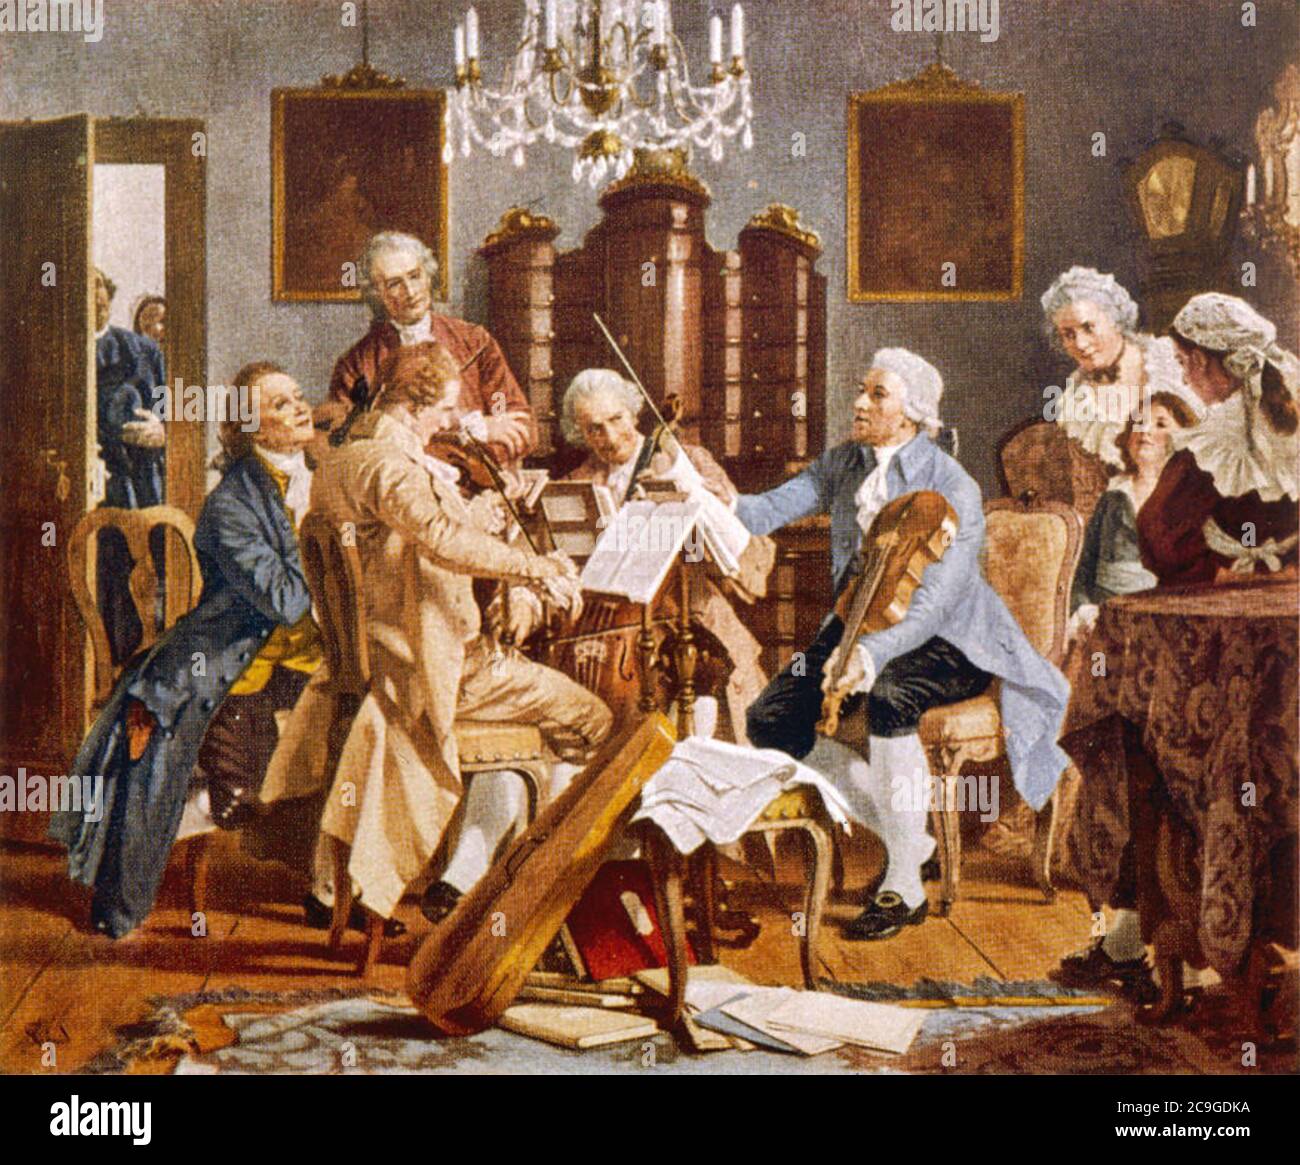 JOSEPH HAYDN (1732-1809) Austrian composer seated right with a quartet of musicians in an imagined scene Stock Photo